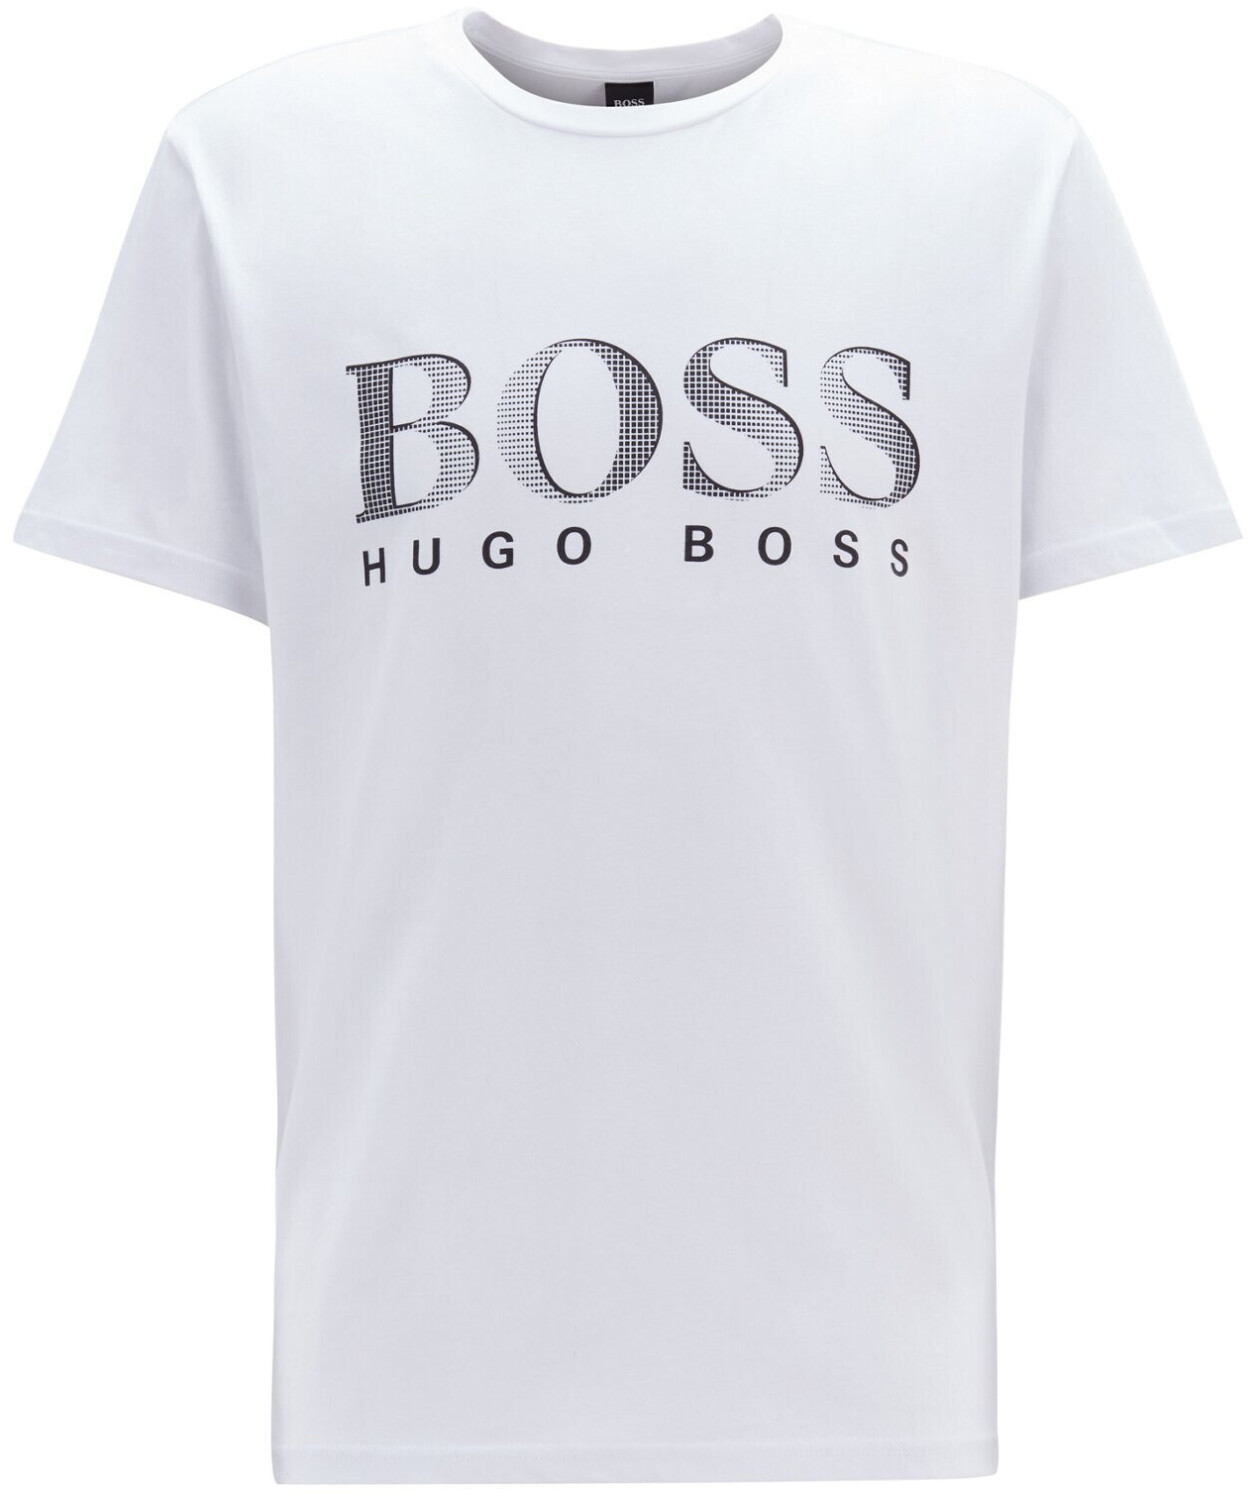 Buy Hugo Boss Relaxed-fit UPF 50+ T-shirt in responsibly sourced cotton ...